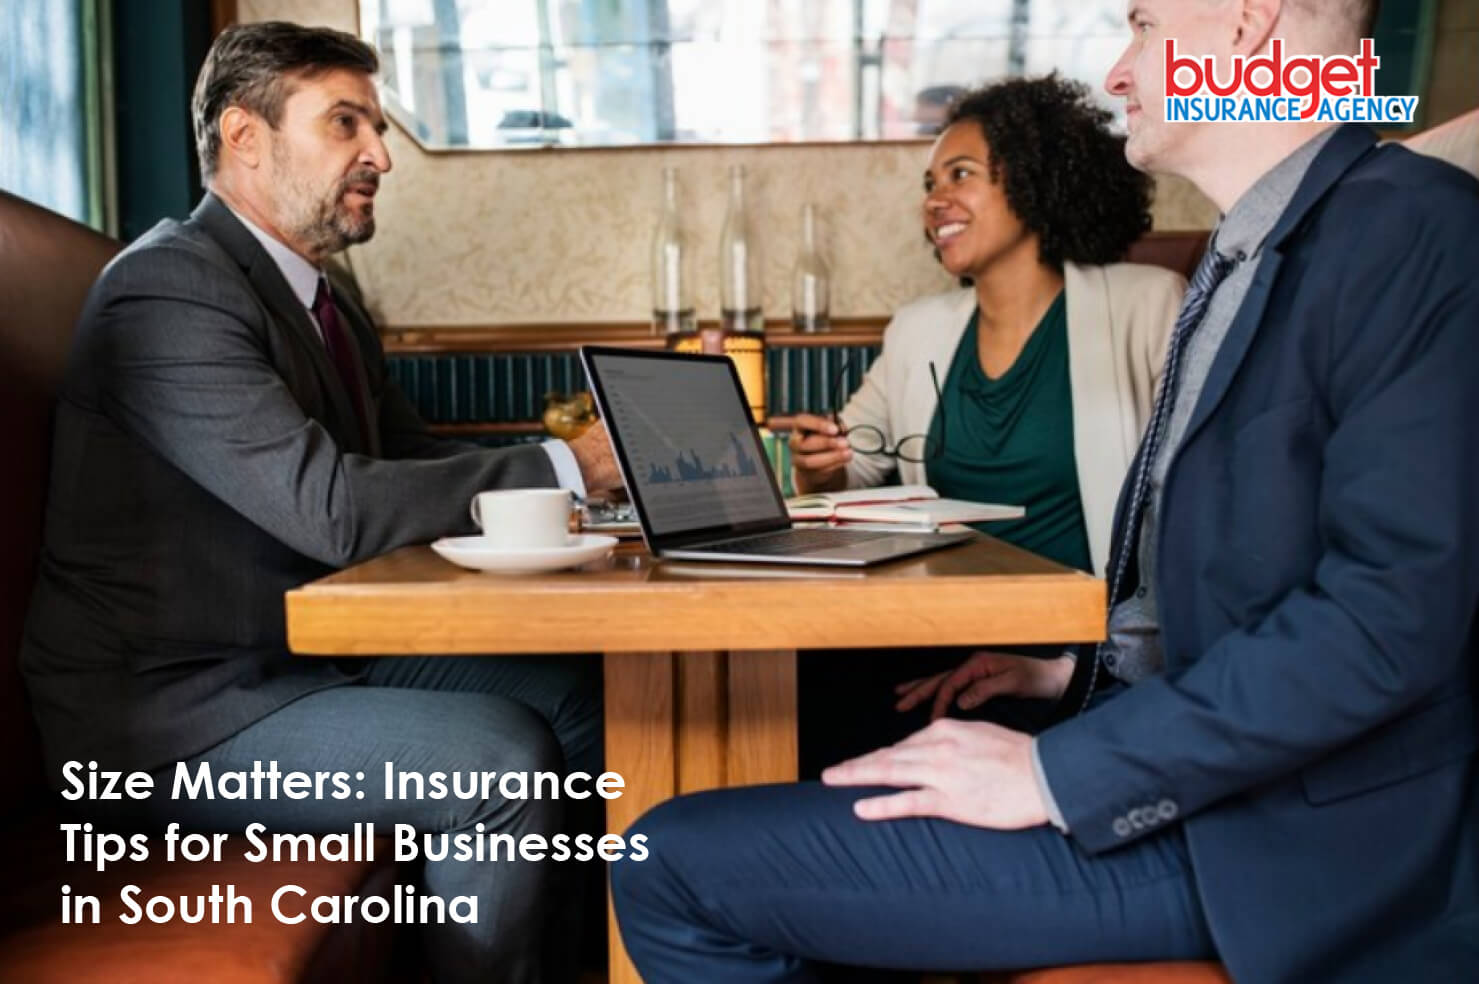 Size Matters: Insurance Tips for Small Businesses in South Carolina